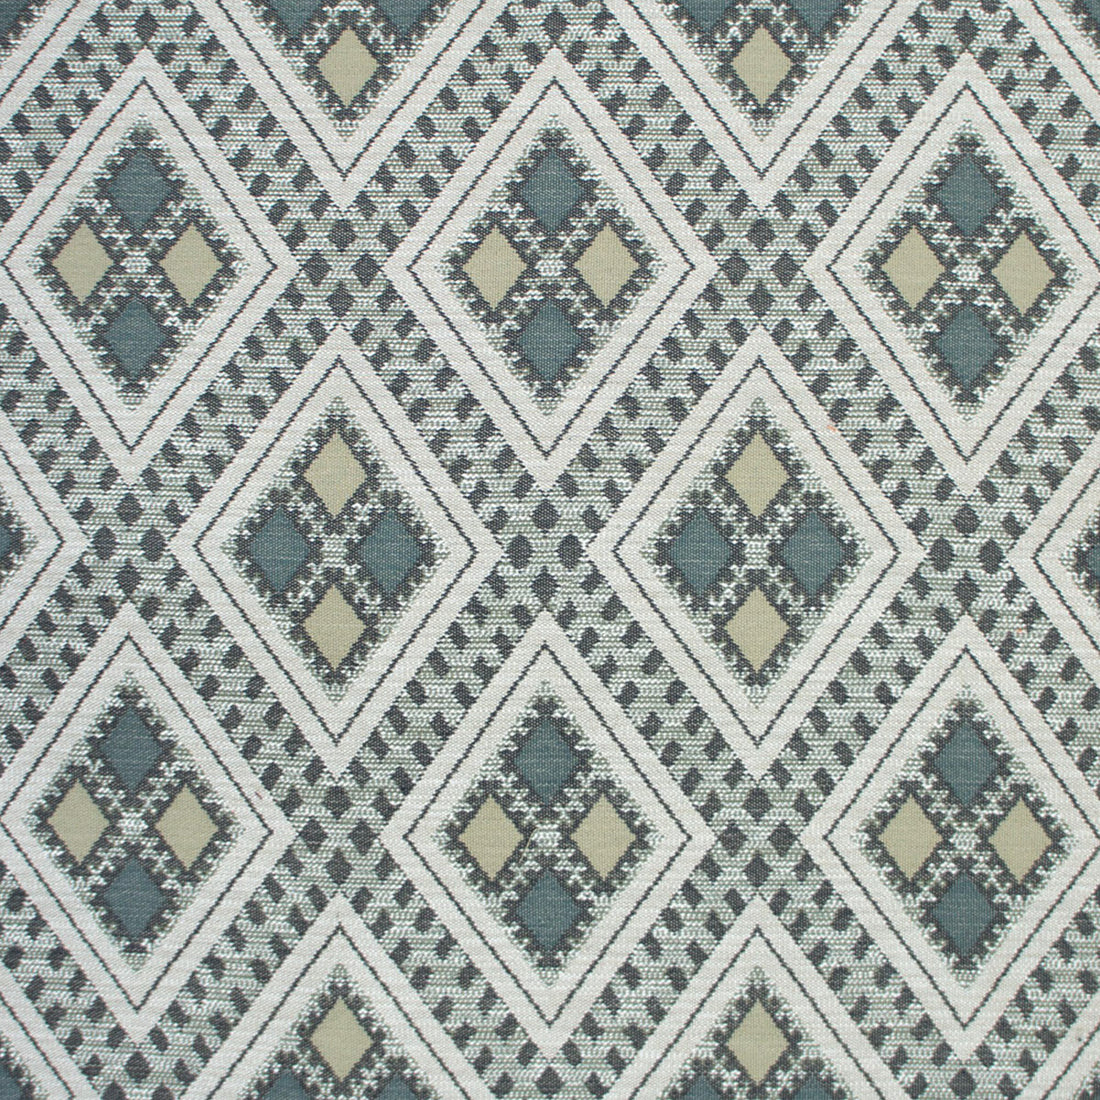 Chihuahua fabric in verde/gris color - pattern GDT5656.004.0 - by Gaston y Daniela in the Gaston Rio Grande collection